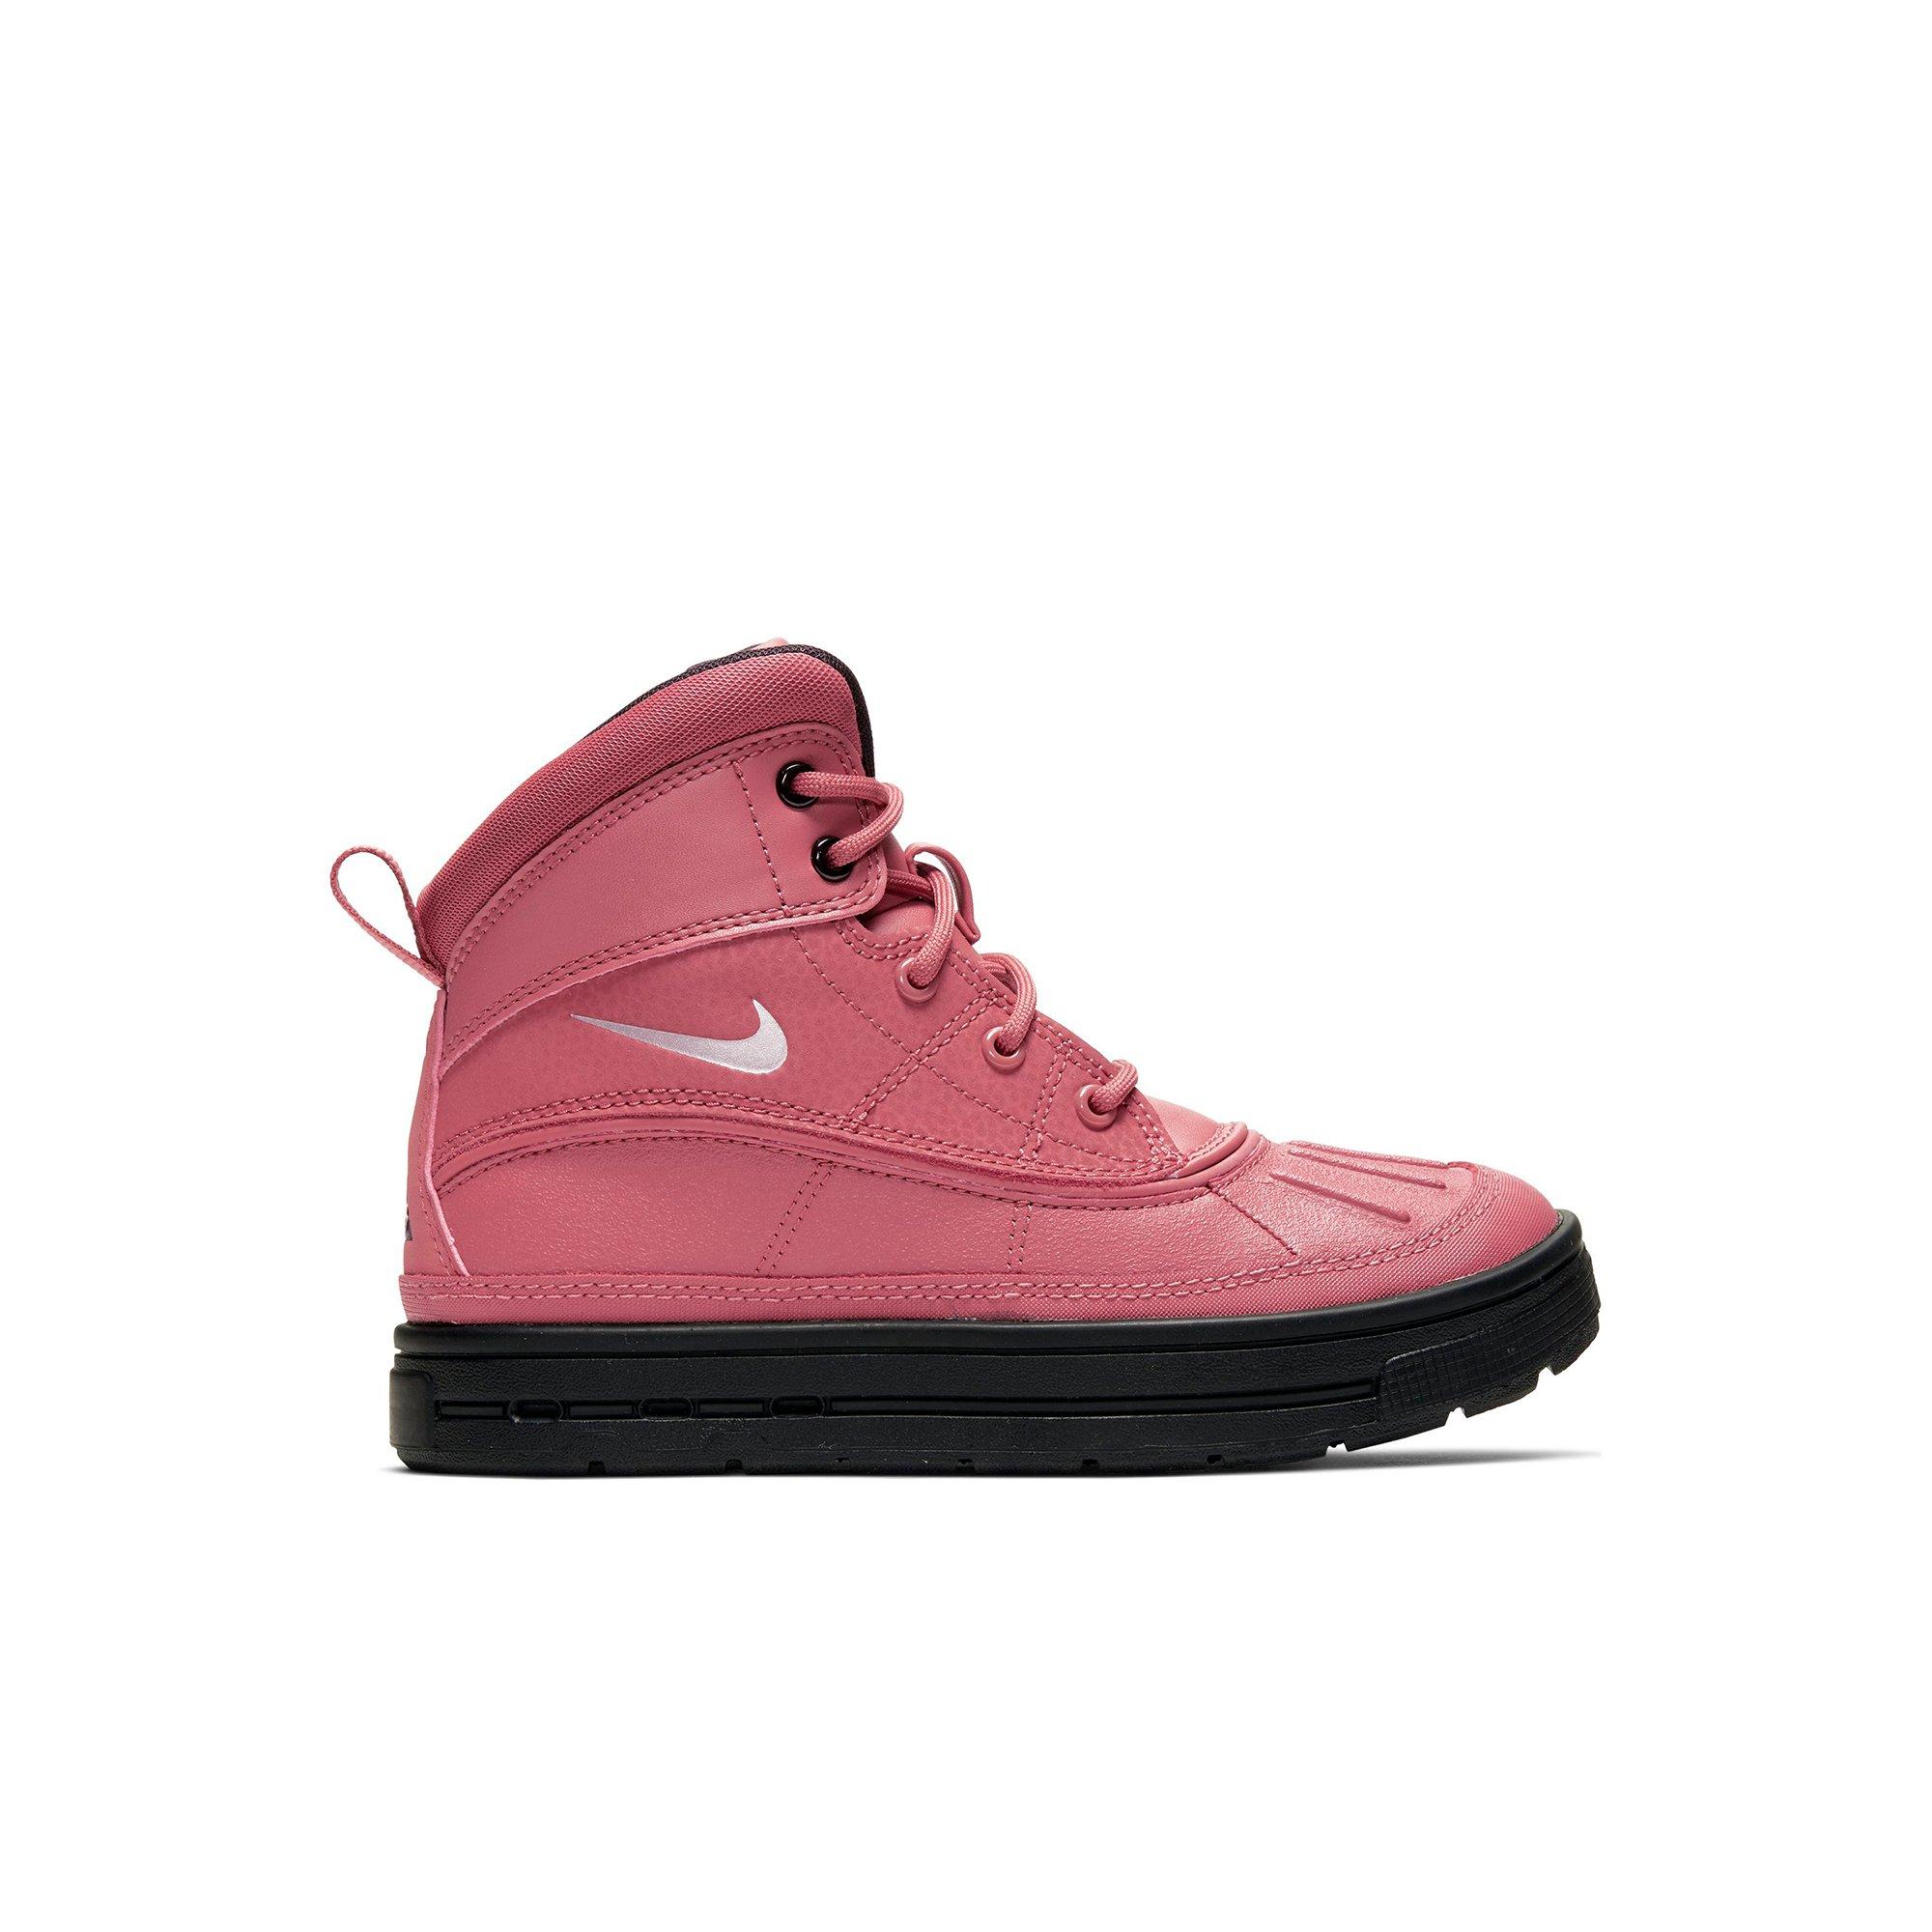 pink and black nike boots